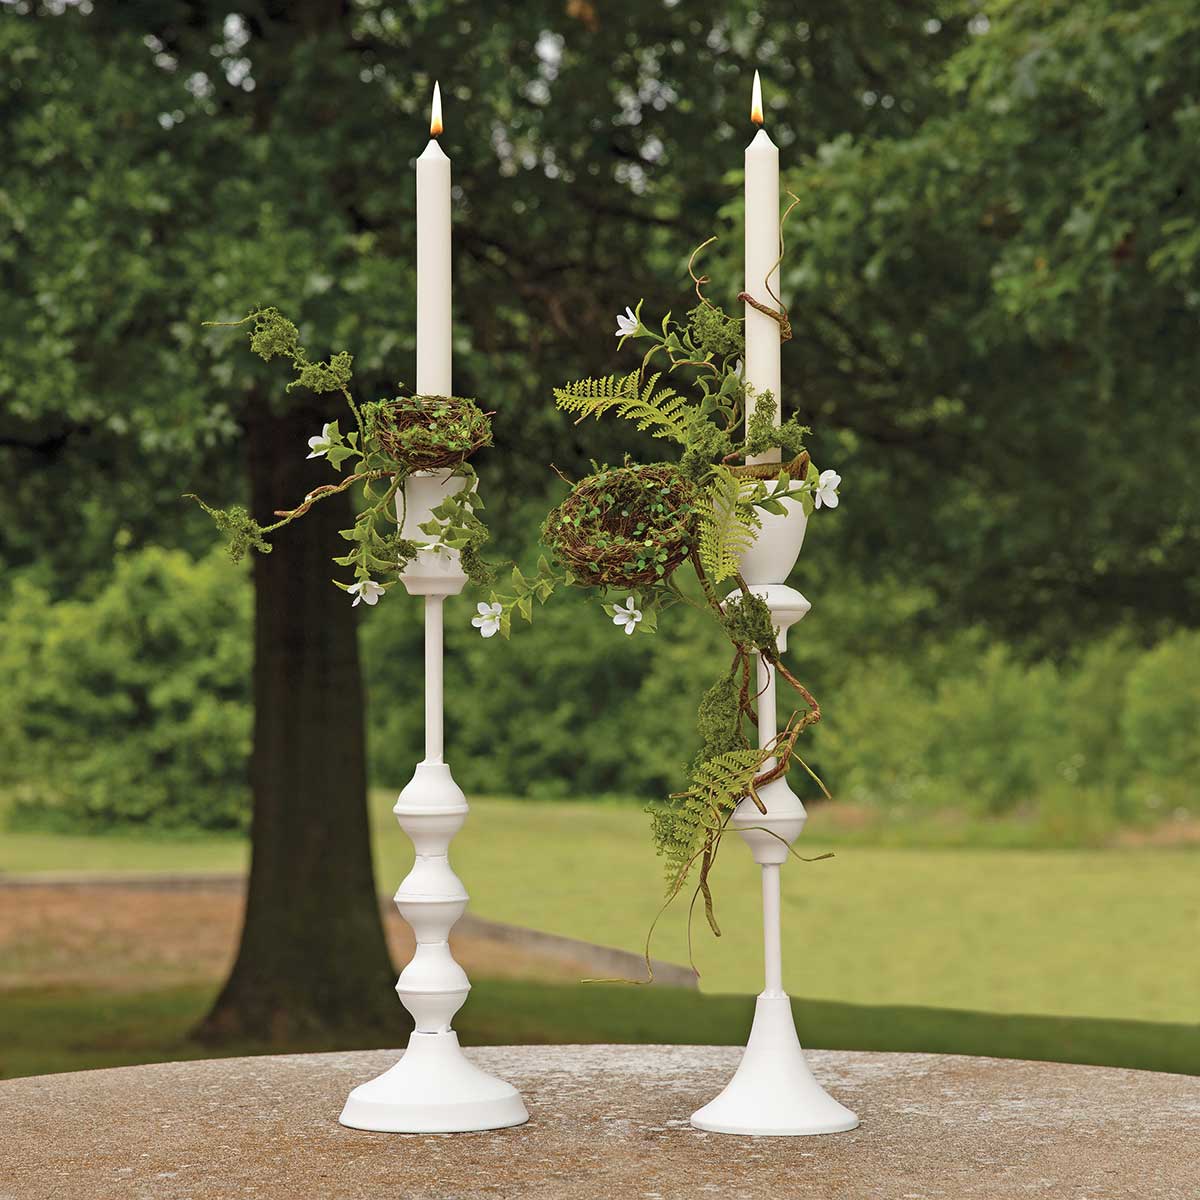 CANDLESTICK/HOLDER 3.75IN X 14.75IN MATTE WHITE METAL